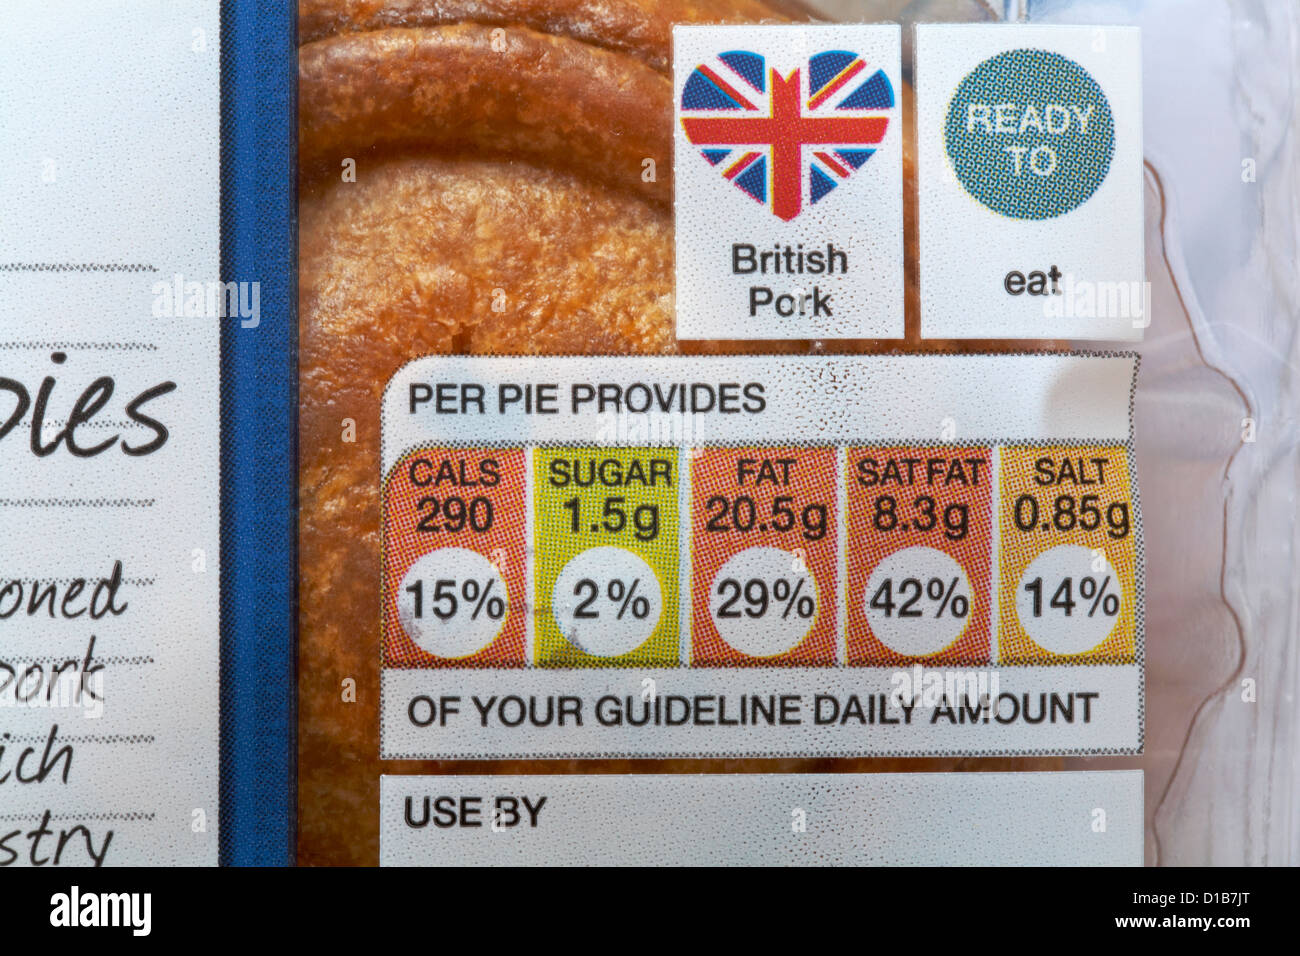 British pork ready to eat symbols with GDA Guideline Daily Amount information on pork pie packaging Stock Photo